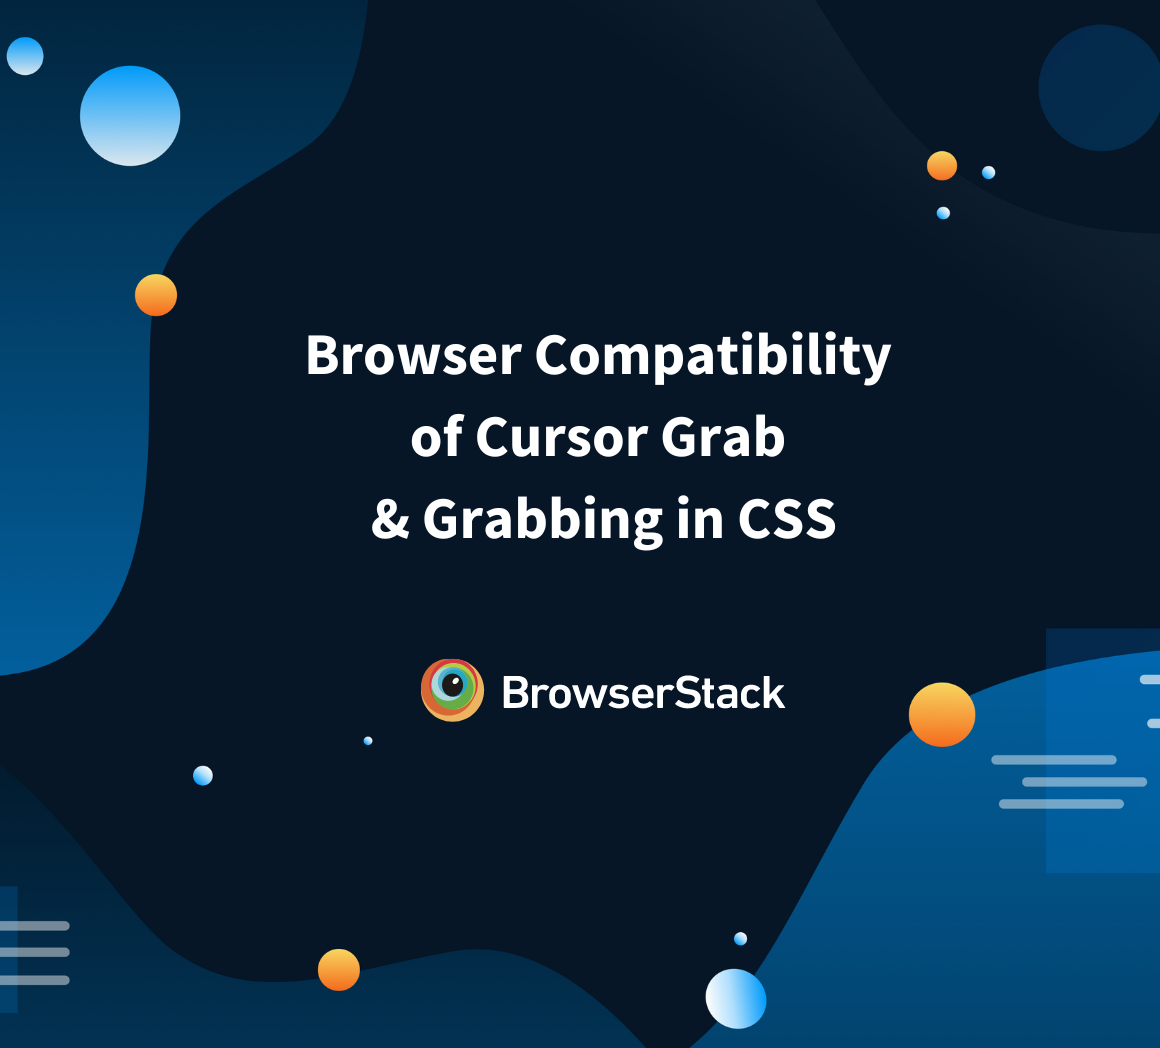 Browser Compatibility of Cursor Grab & Grabbing in CSS